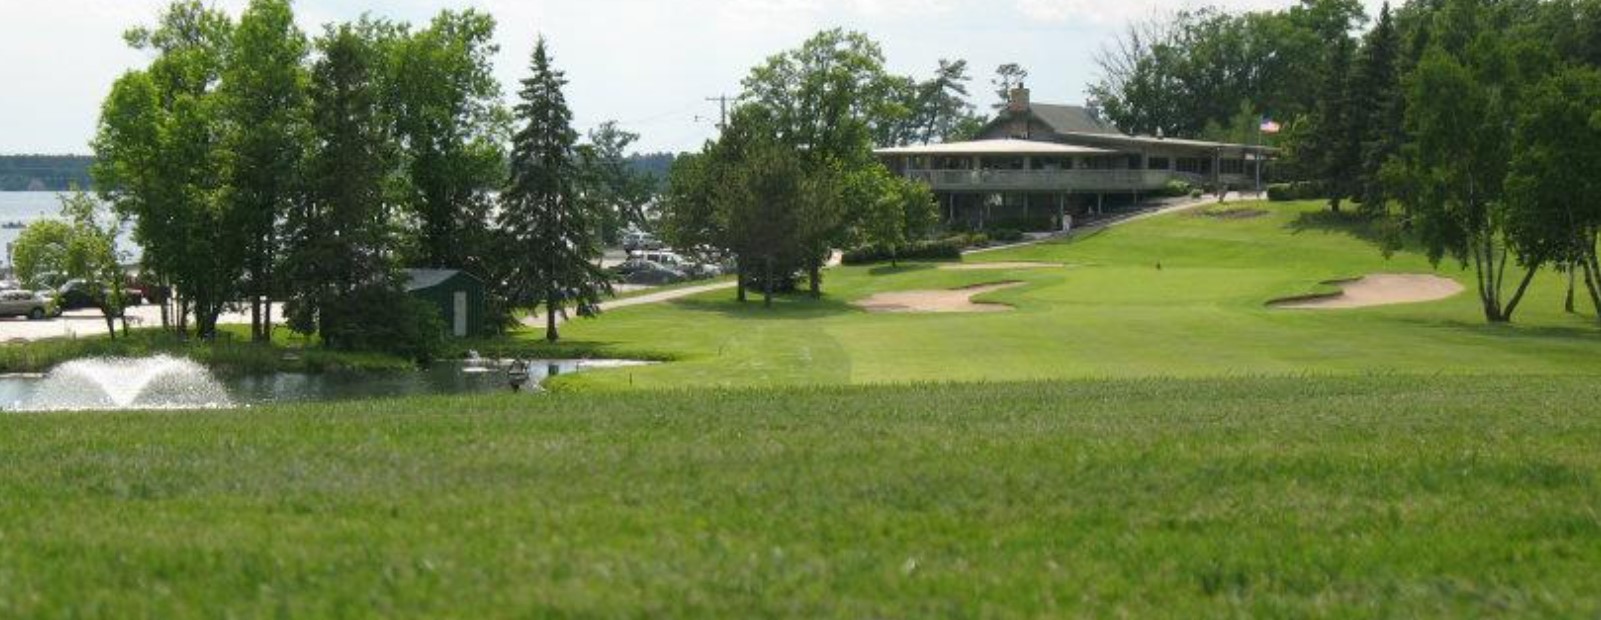 Bemidji Town and Country Club